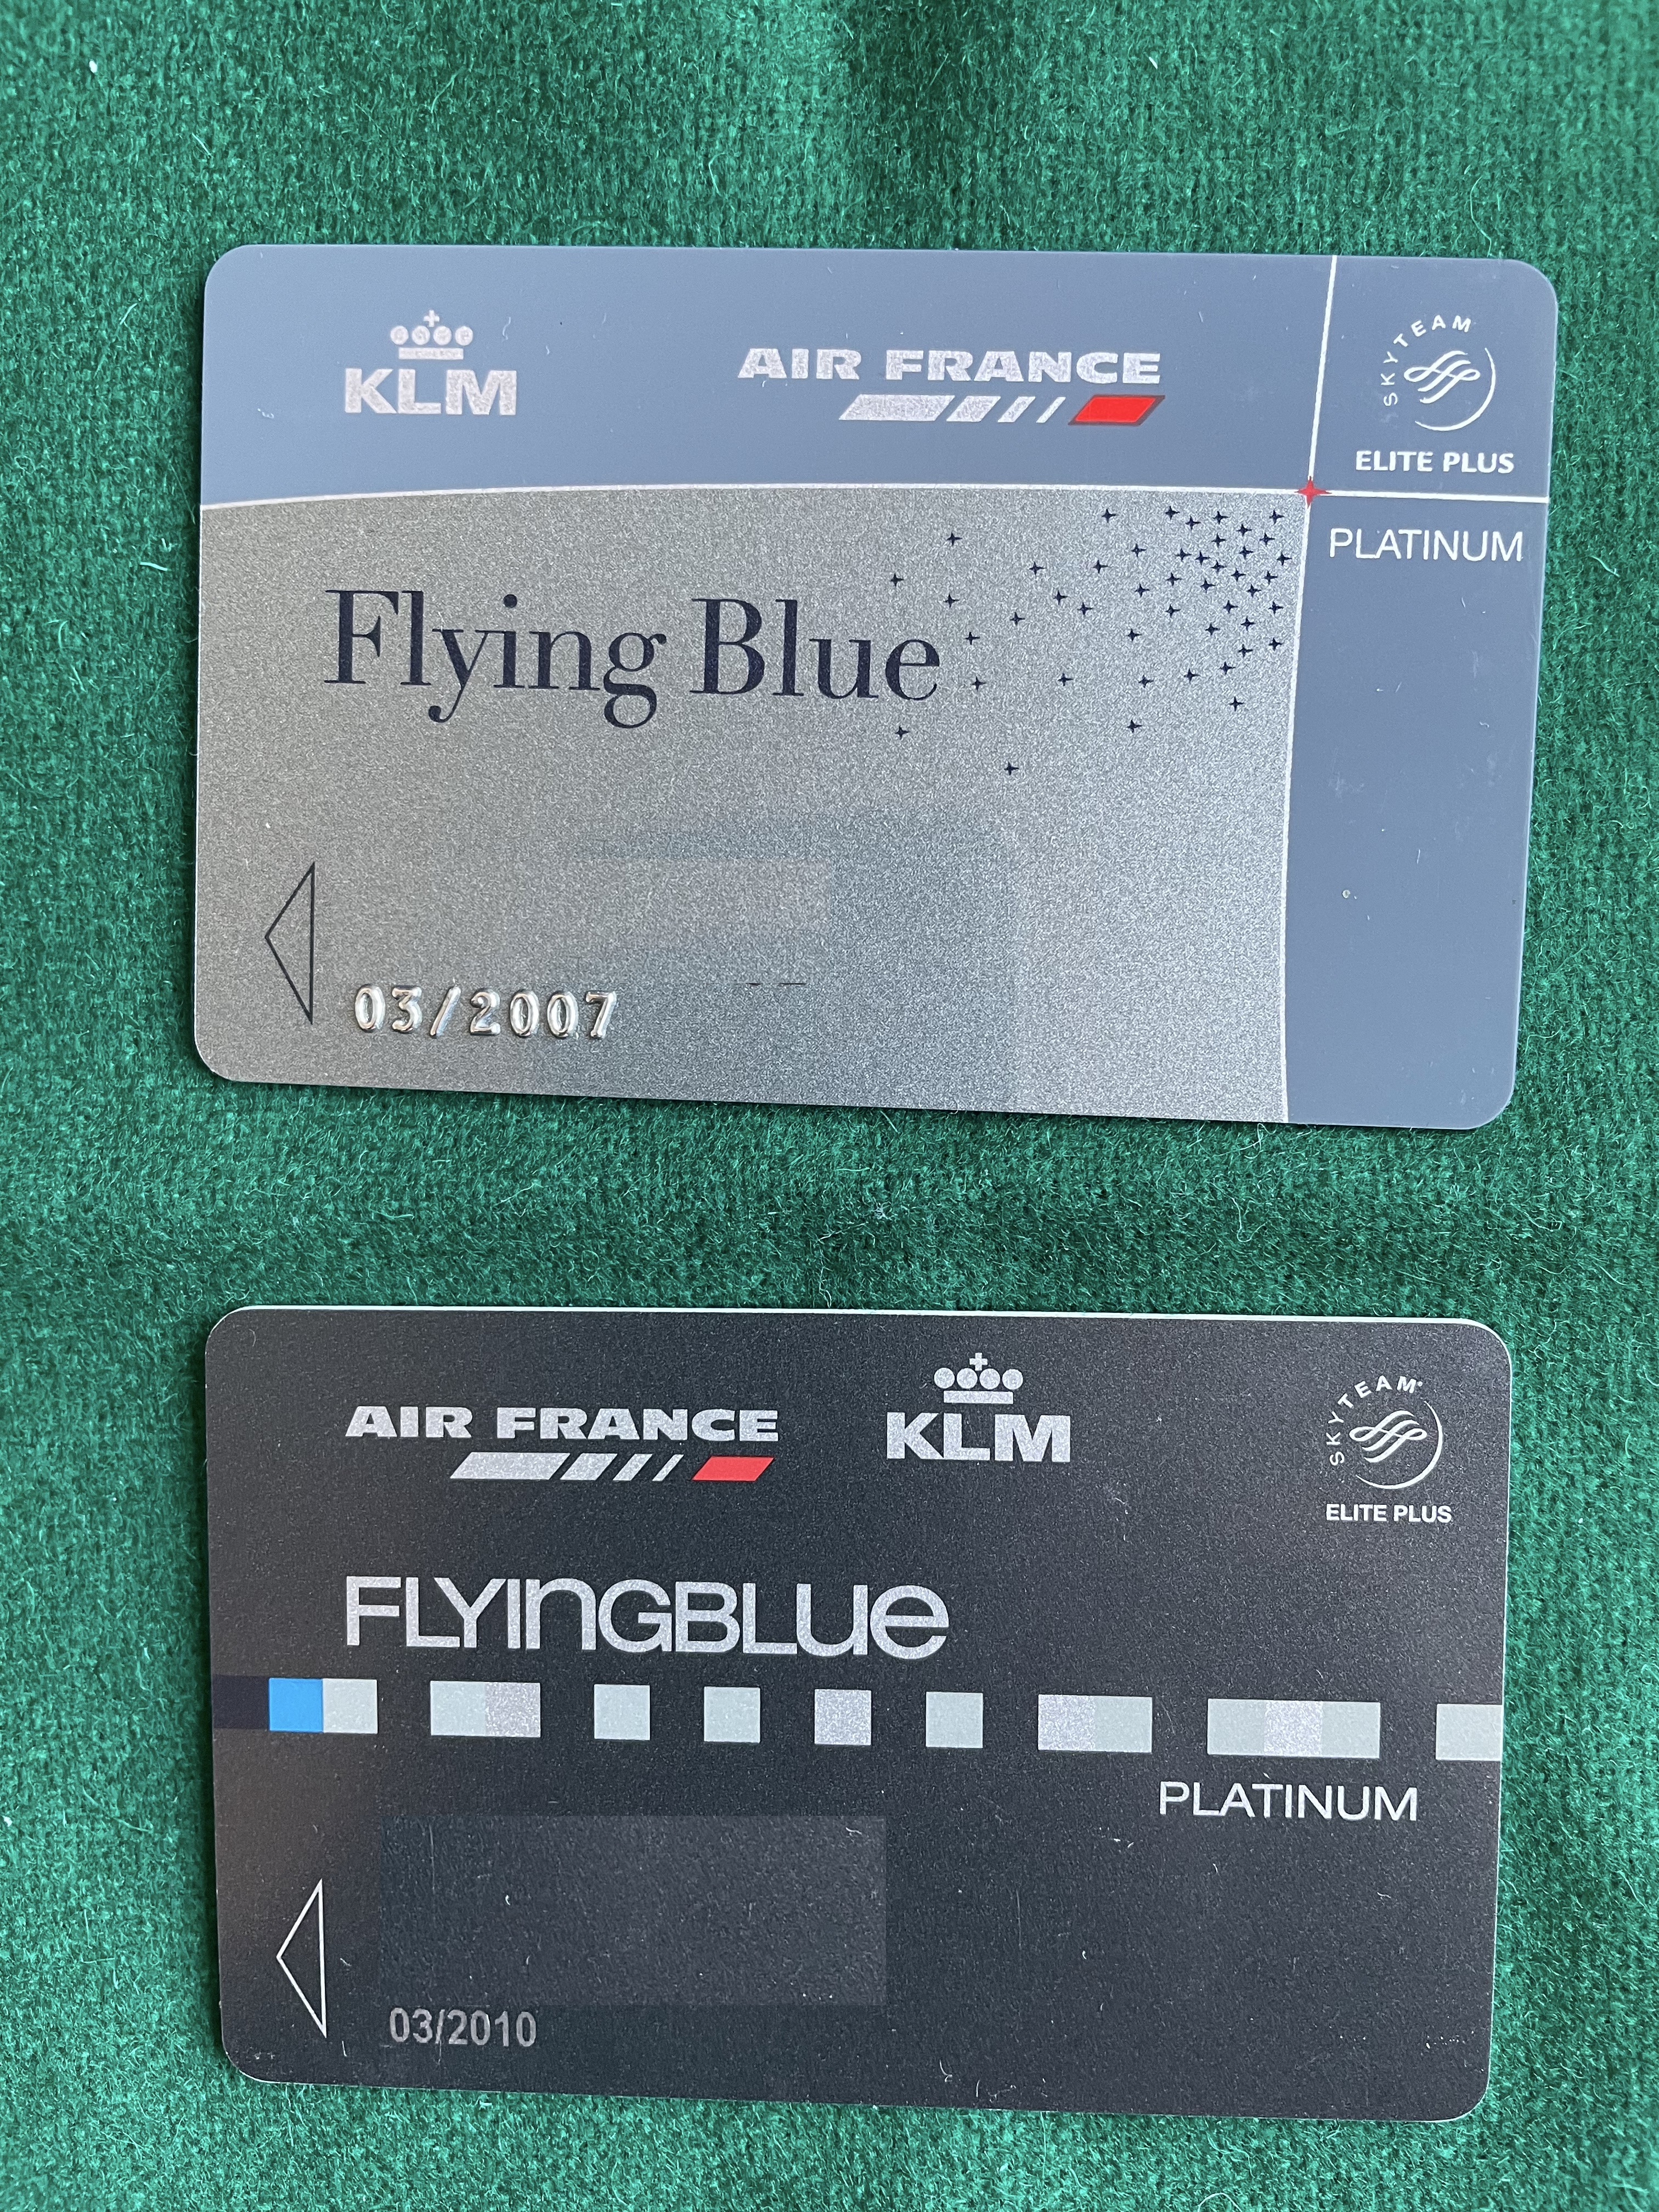 Frequent Flyer Card